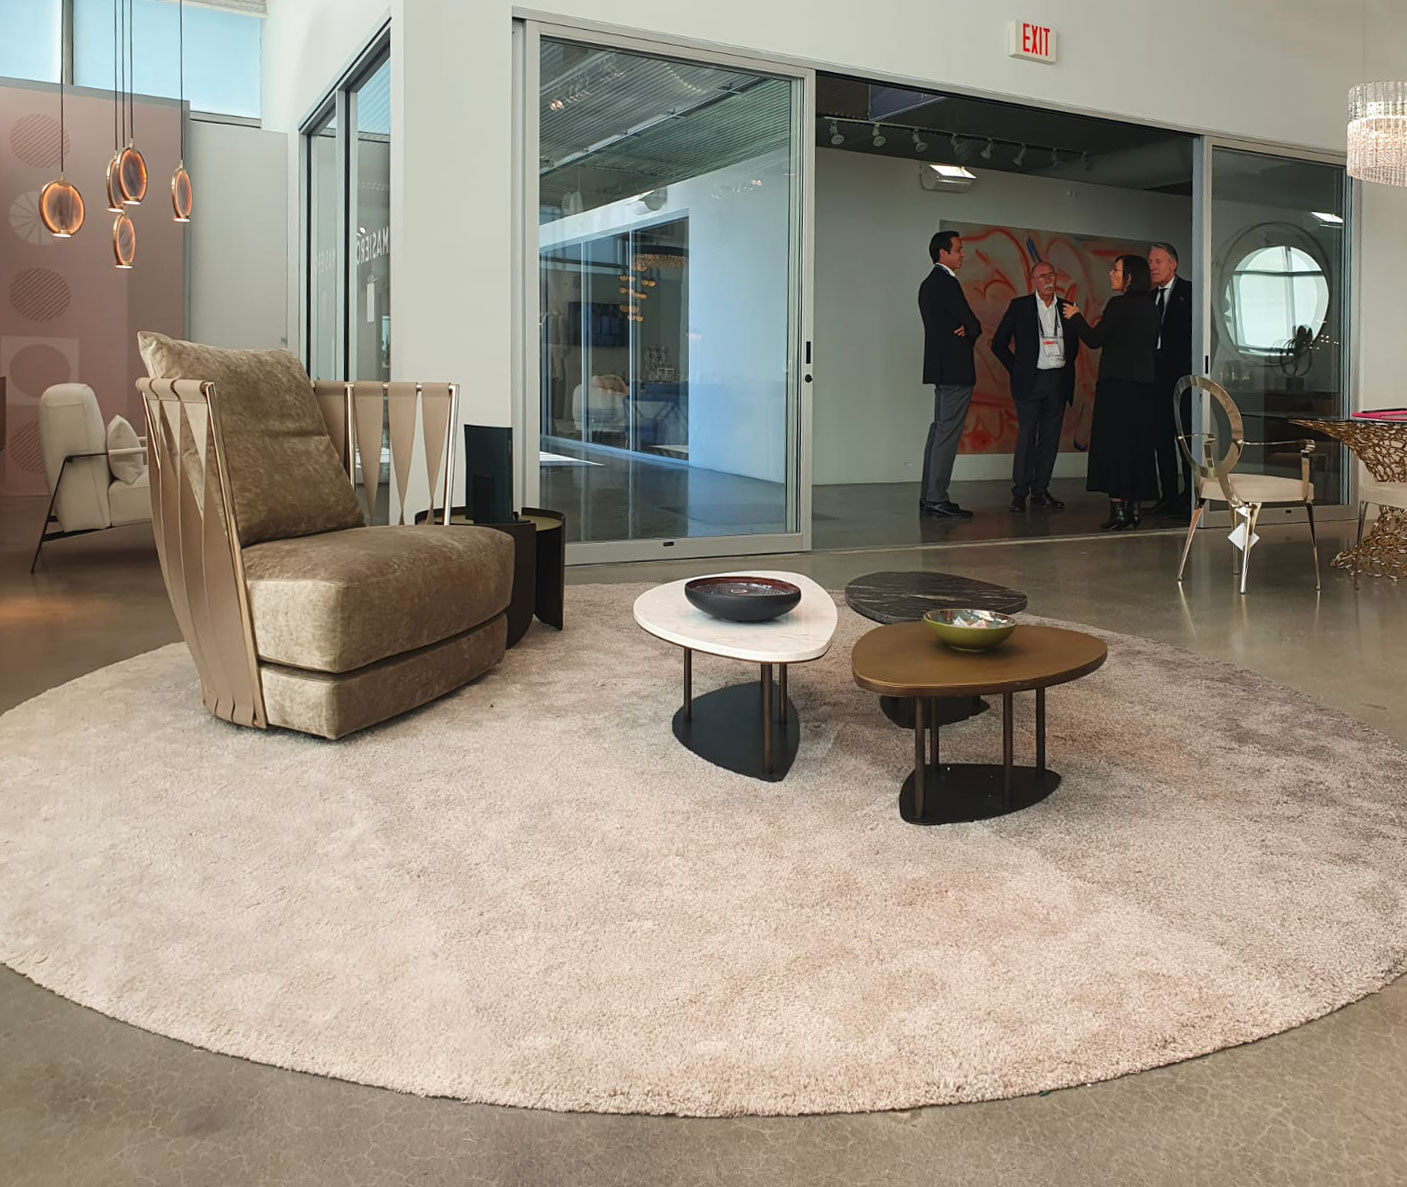 Cantori at High Point Market 2022 Fall edition with ITALO DESIGN - Cantori